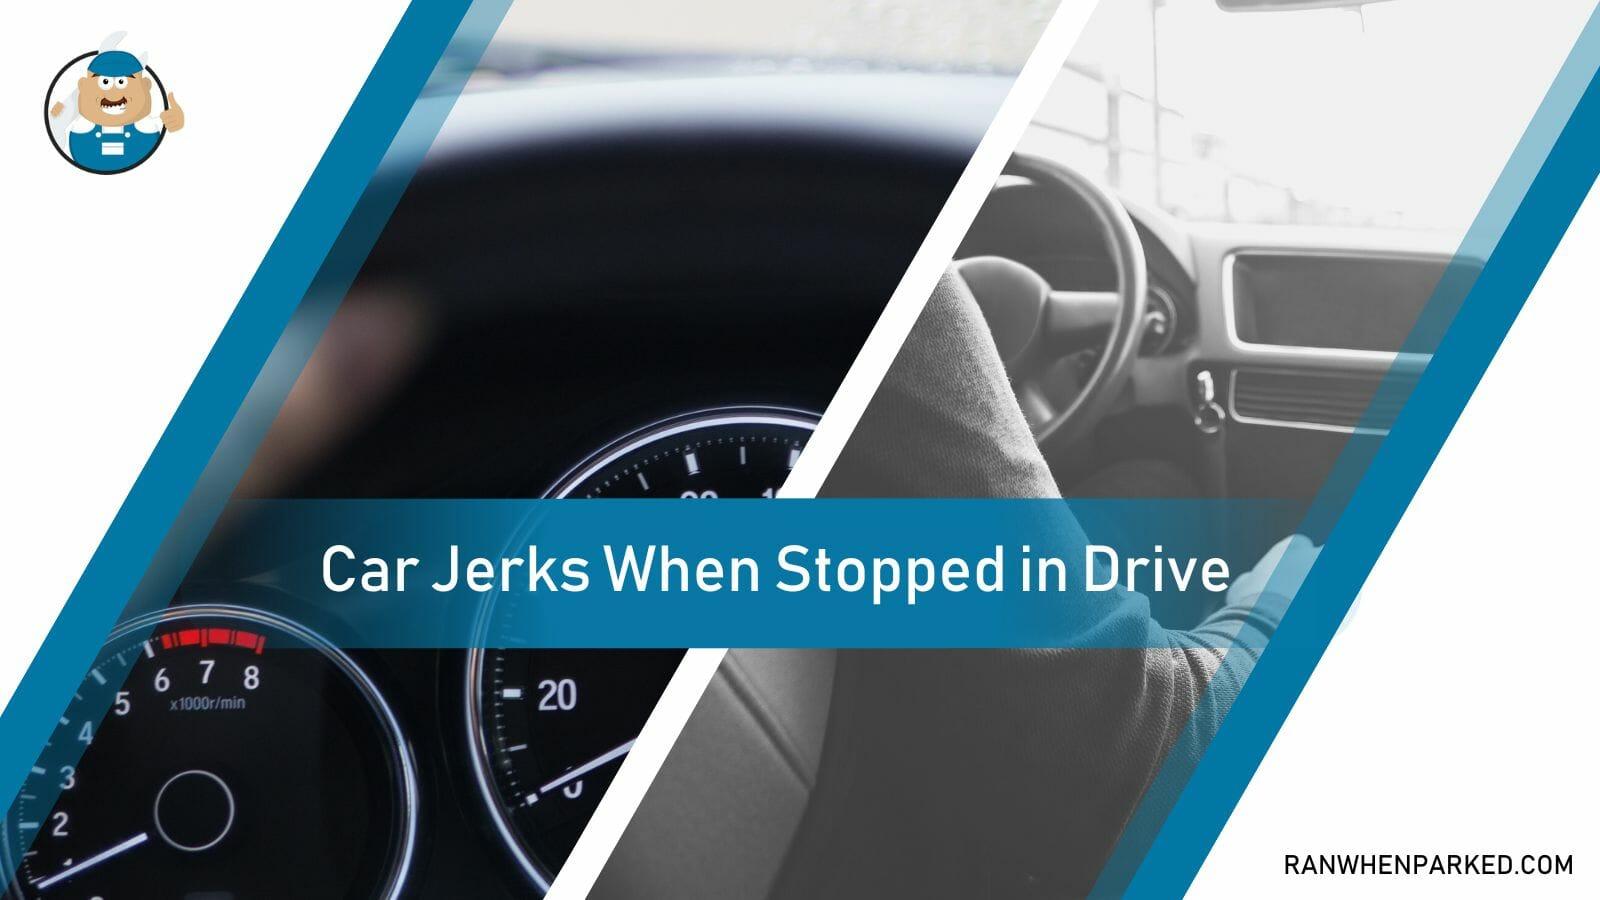 Why Does Your Car Jerk When Stopped in Drive